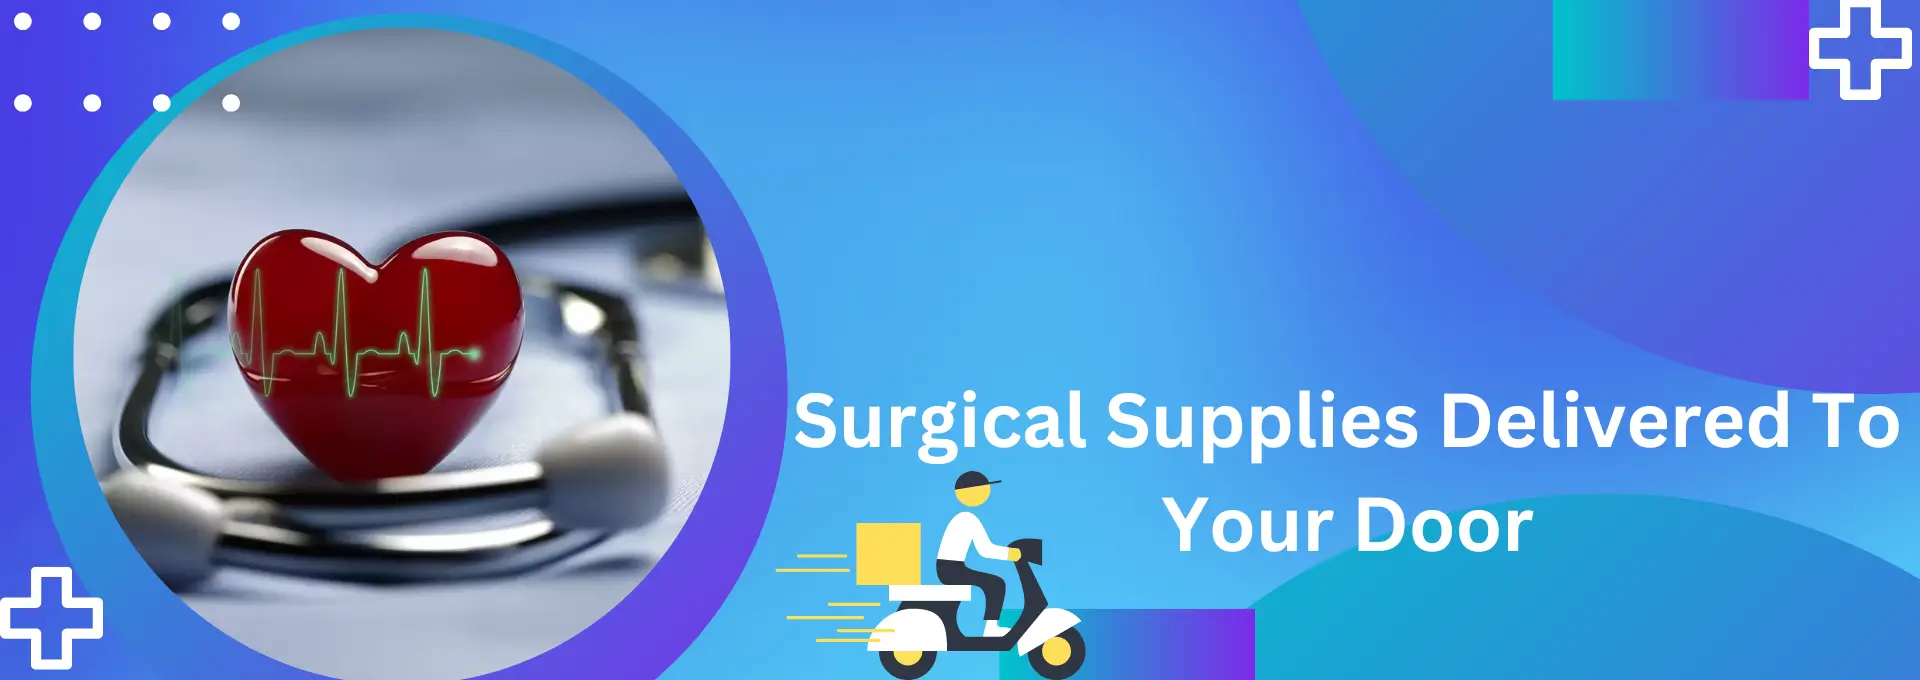 Surgical Supplies Delivered To Your Door